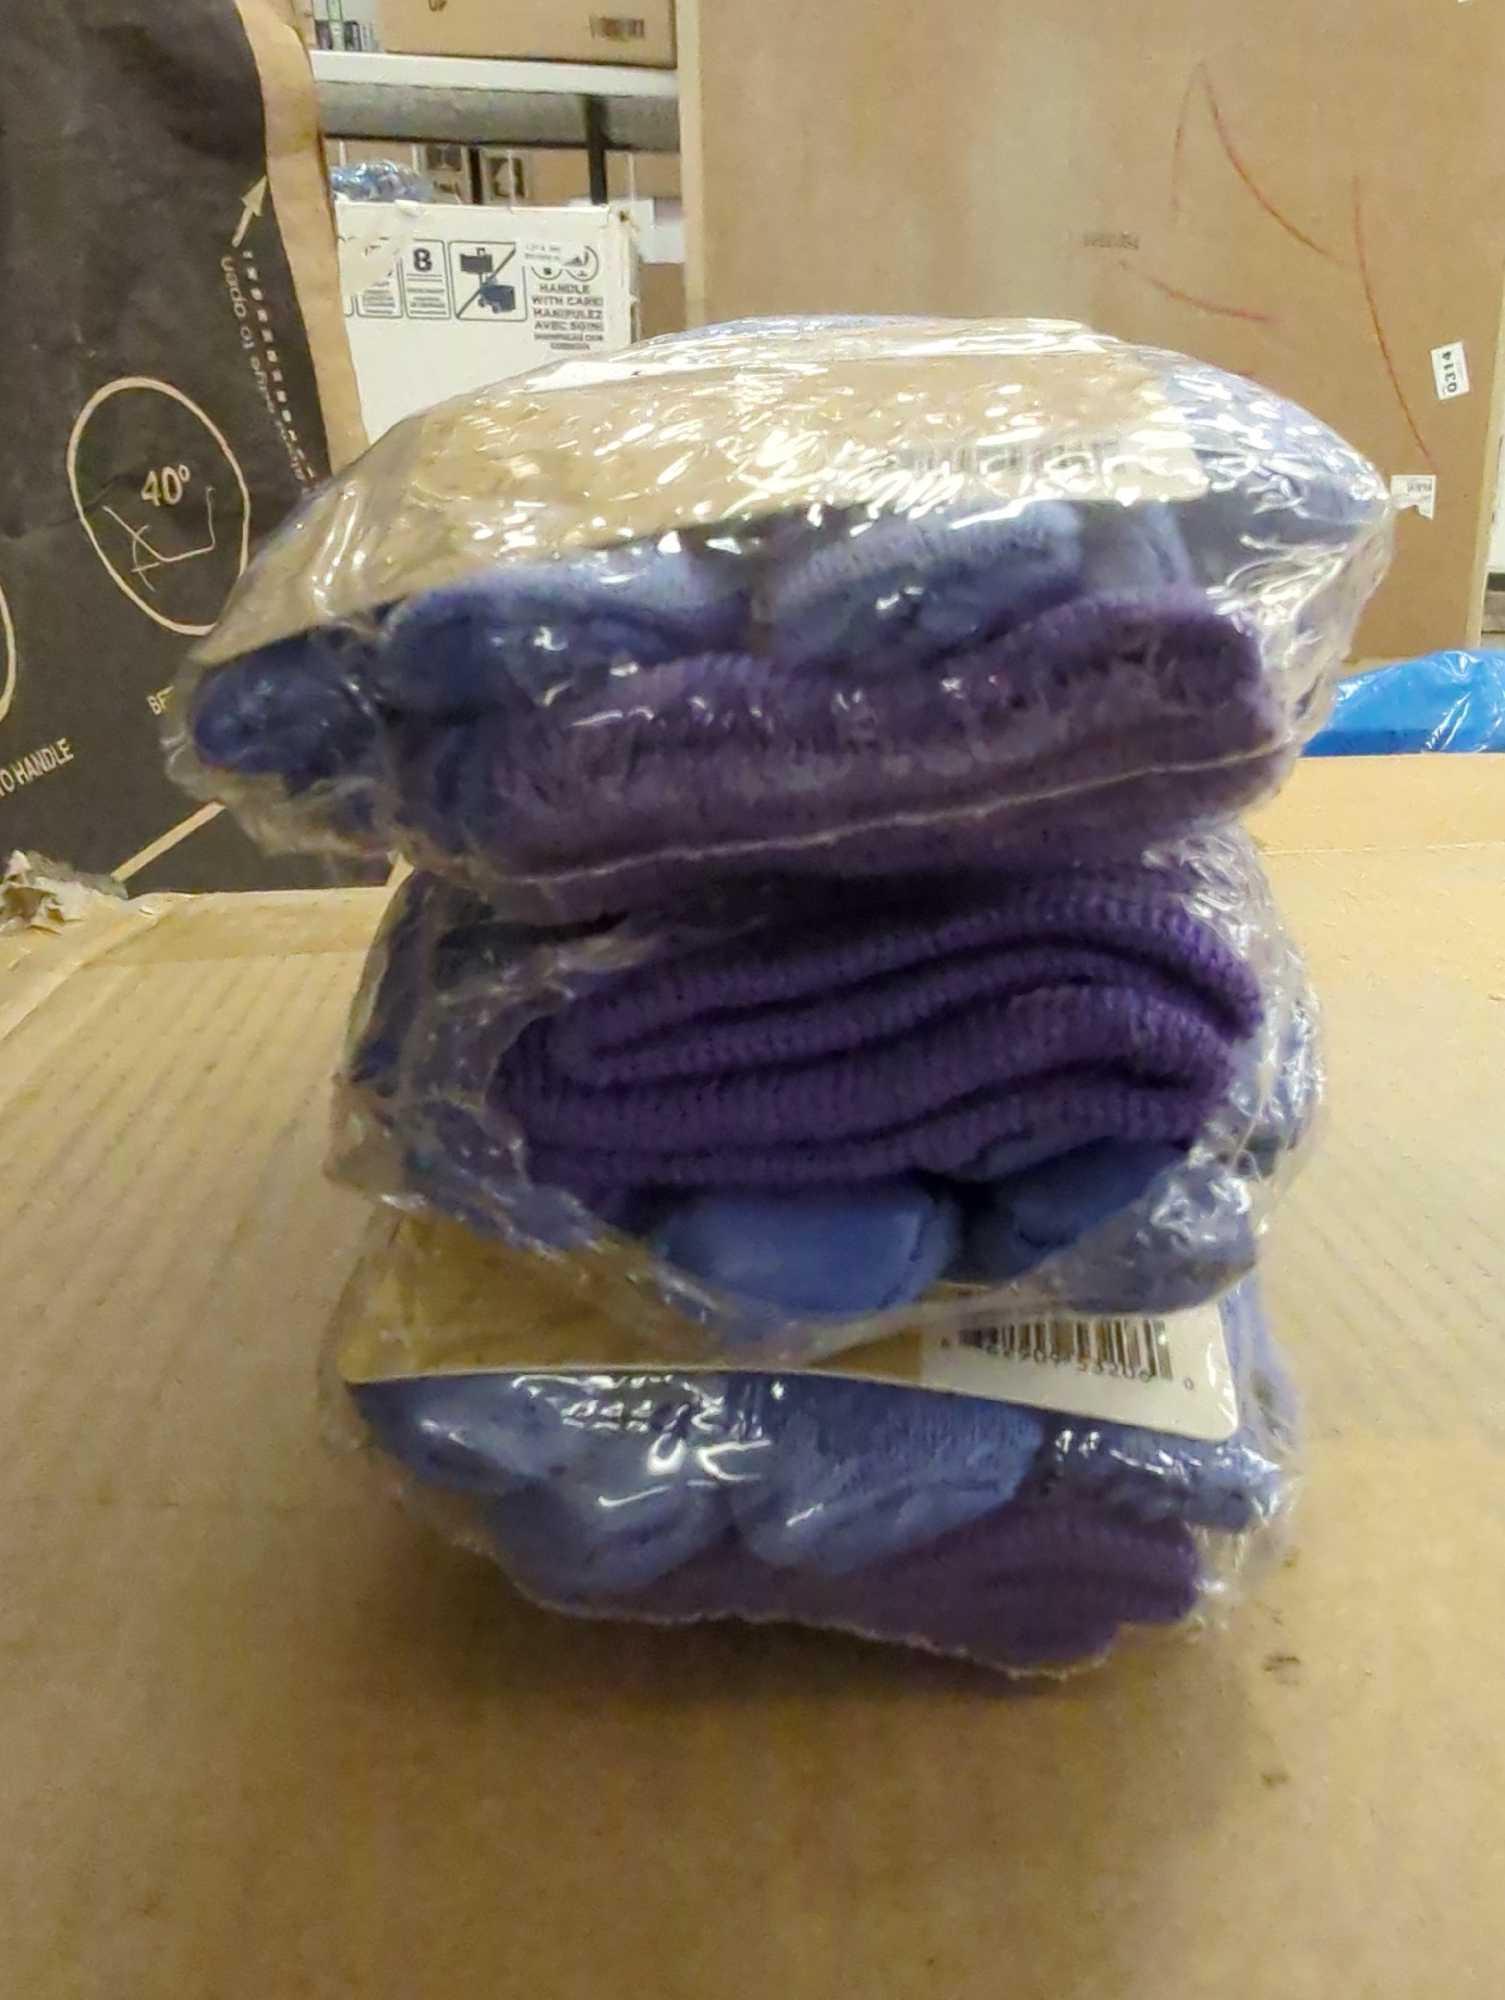 Lot of 3 Packs of Westchester Everyday Tasks Womens Cotton Gloves, size Women?s Med-Large, 6 Pairs,